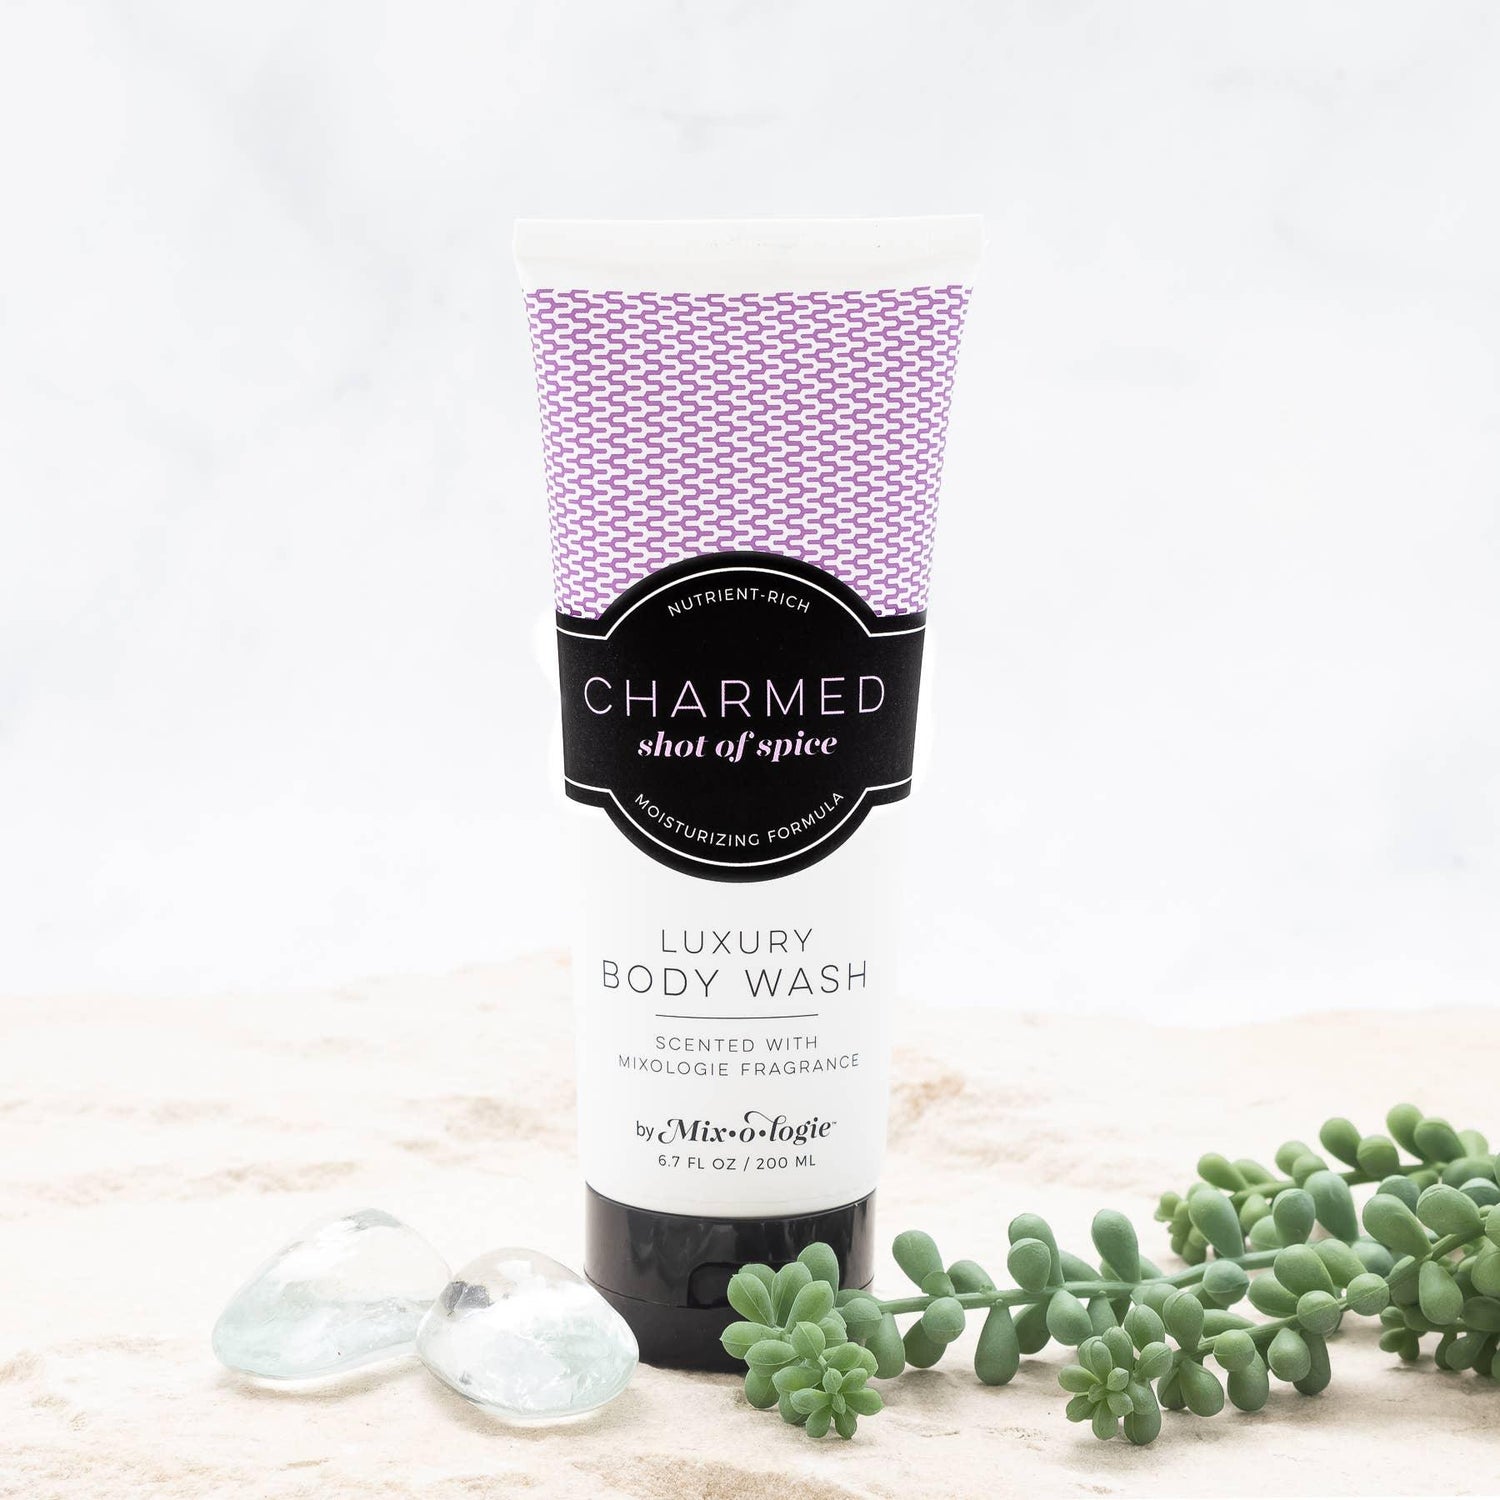 Luxury Body Wash/Shower Gel - Charmed (shot of spice) scent 2